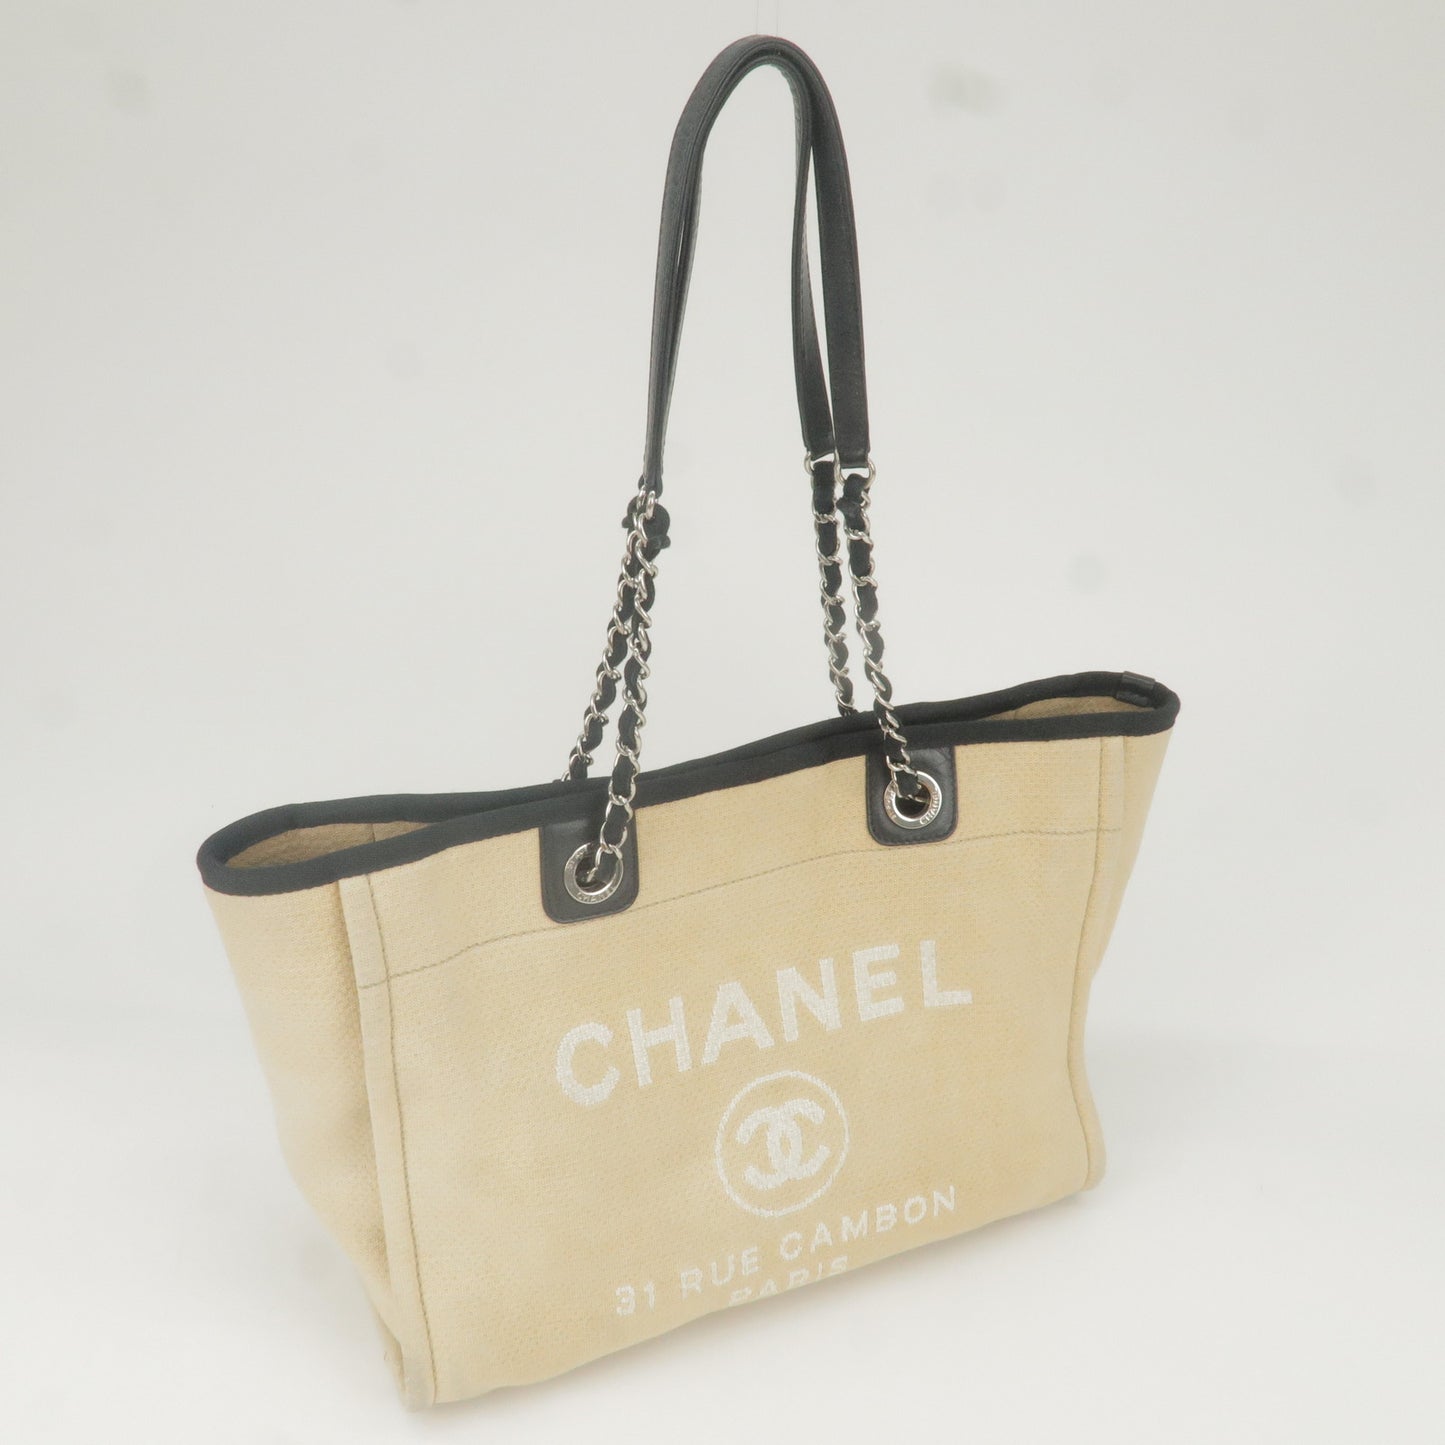 CHANEL Deauville MM Canvas Leather Chain Tote Bag Beige A67001